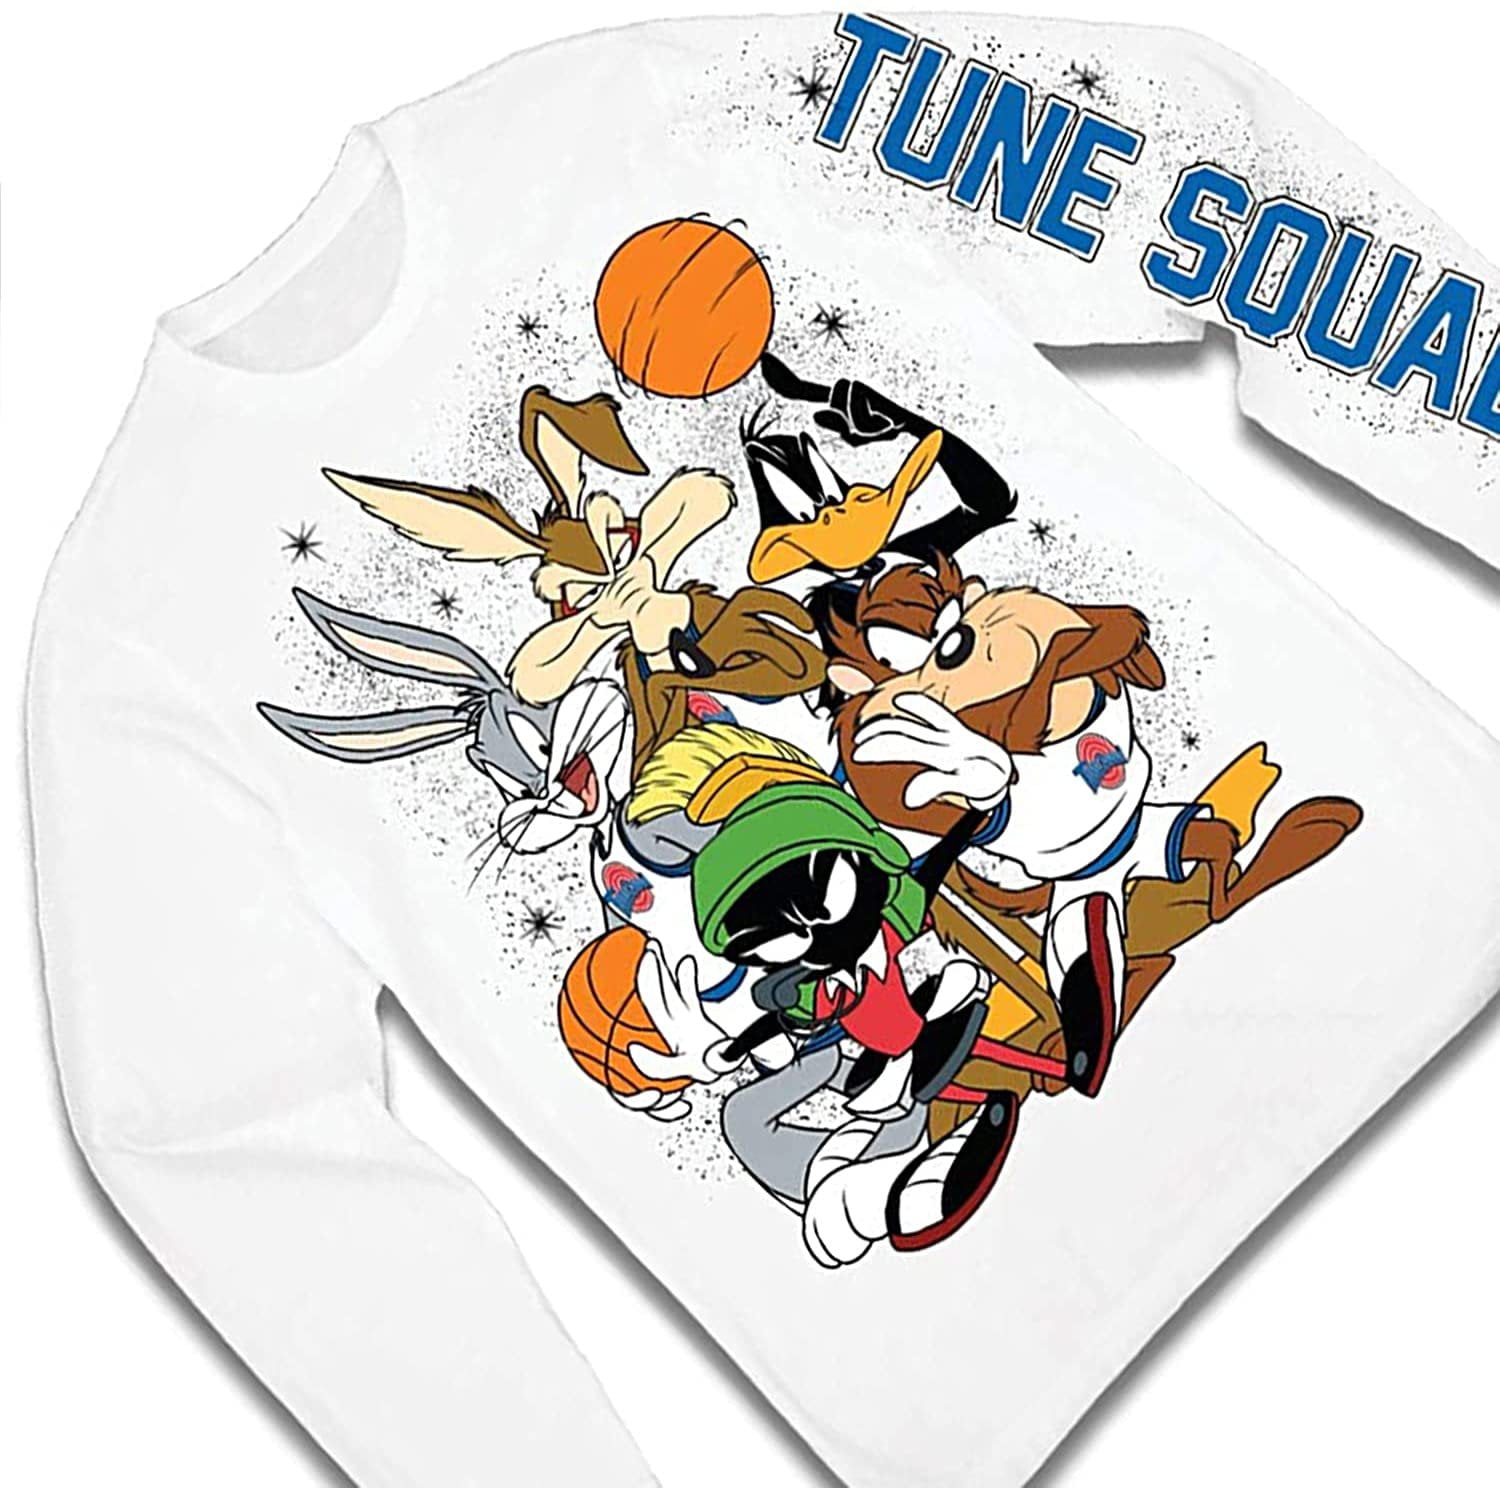 space jam Mens Group Shirt - Tune Squad and Monstars Long Sleeve Tee - 90s  Classic T-Shirt